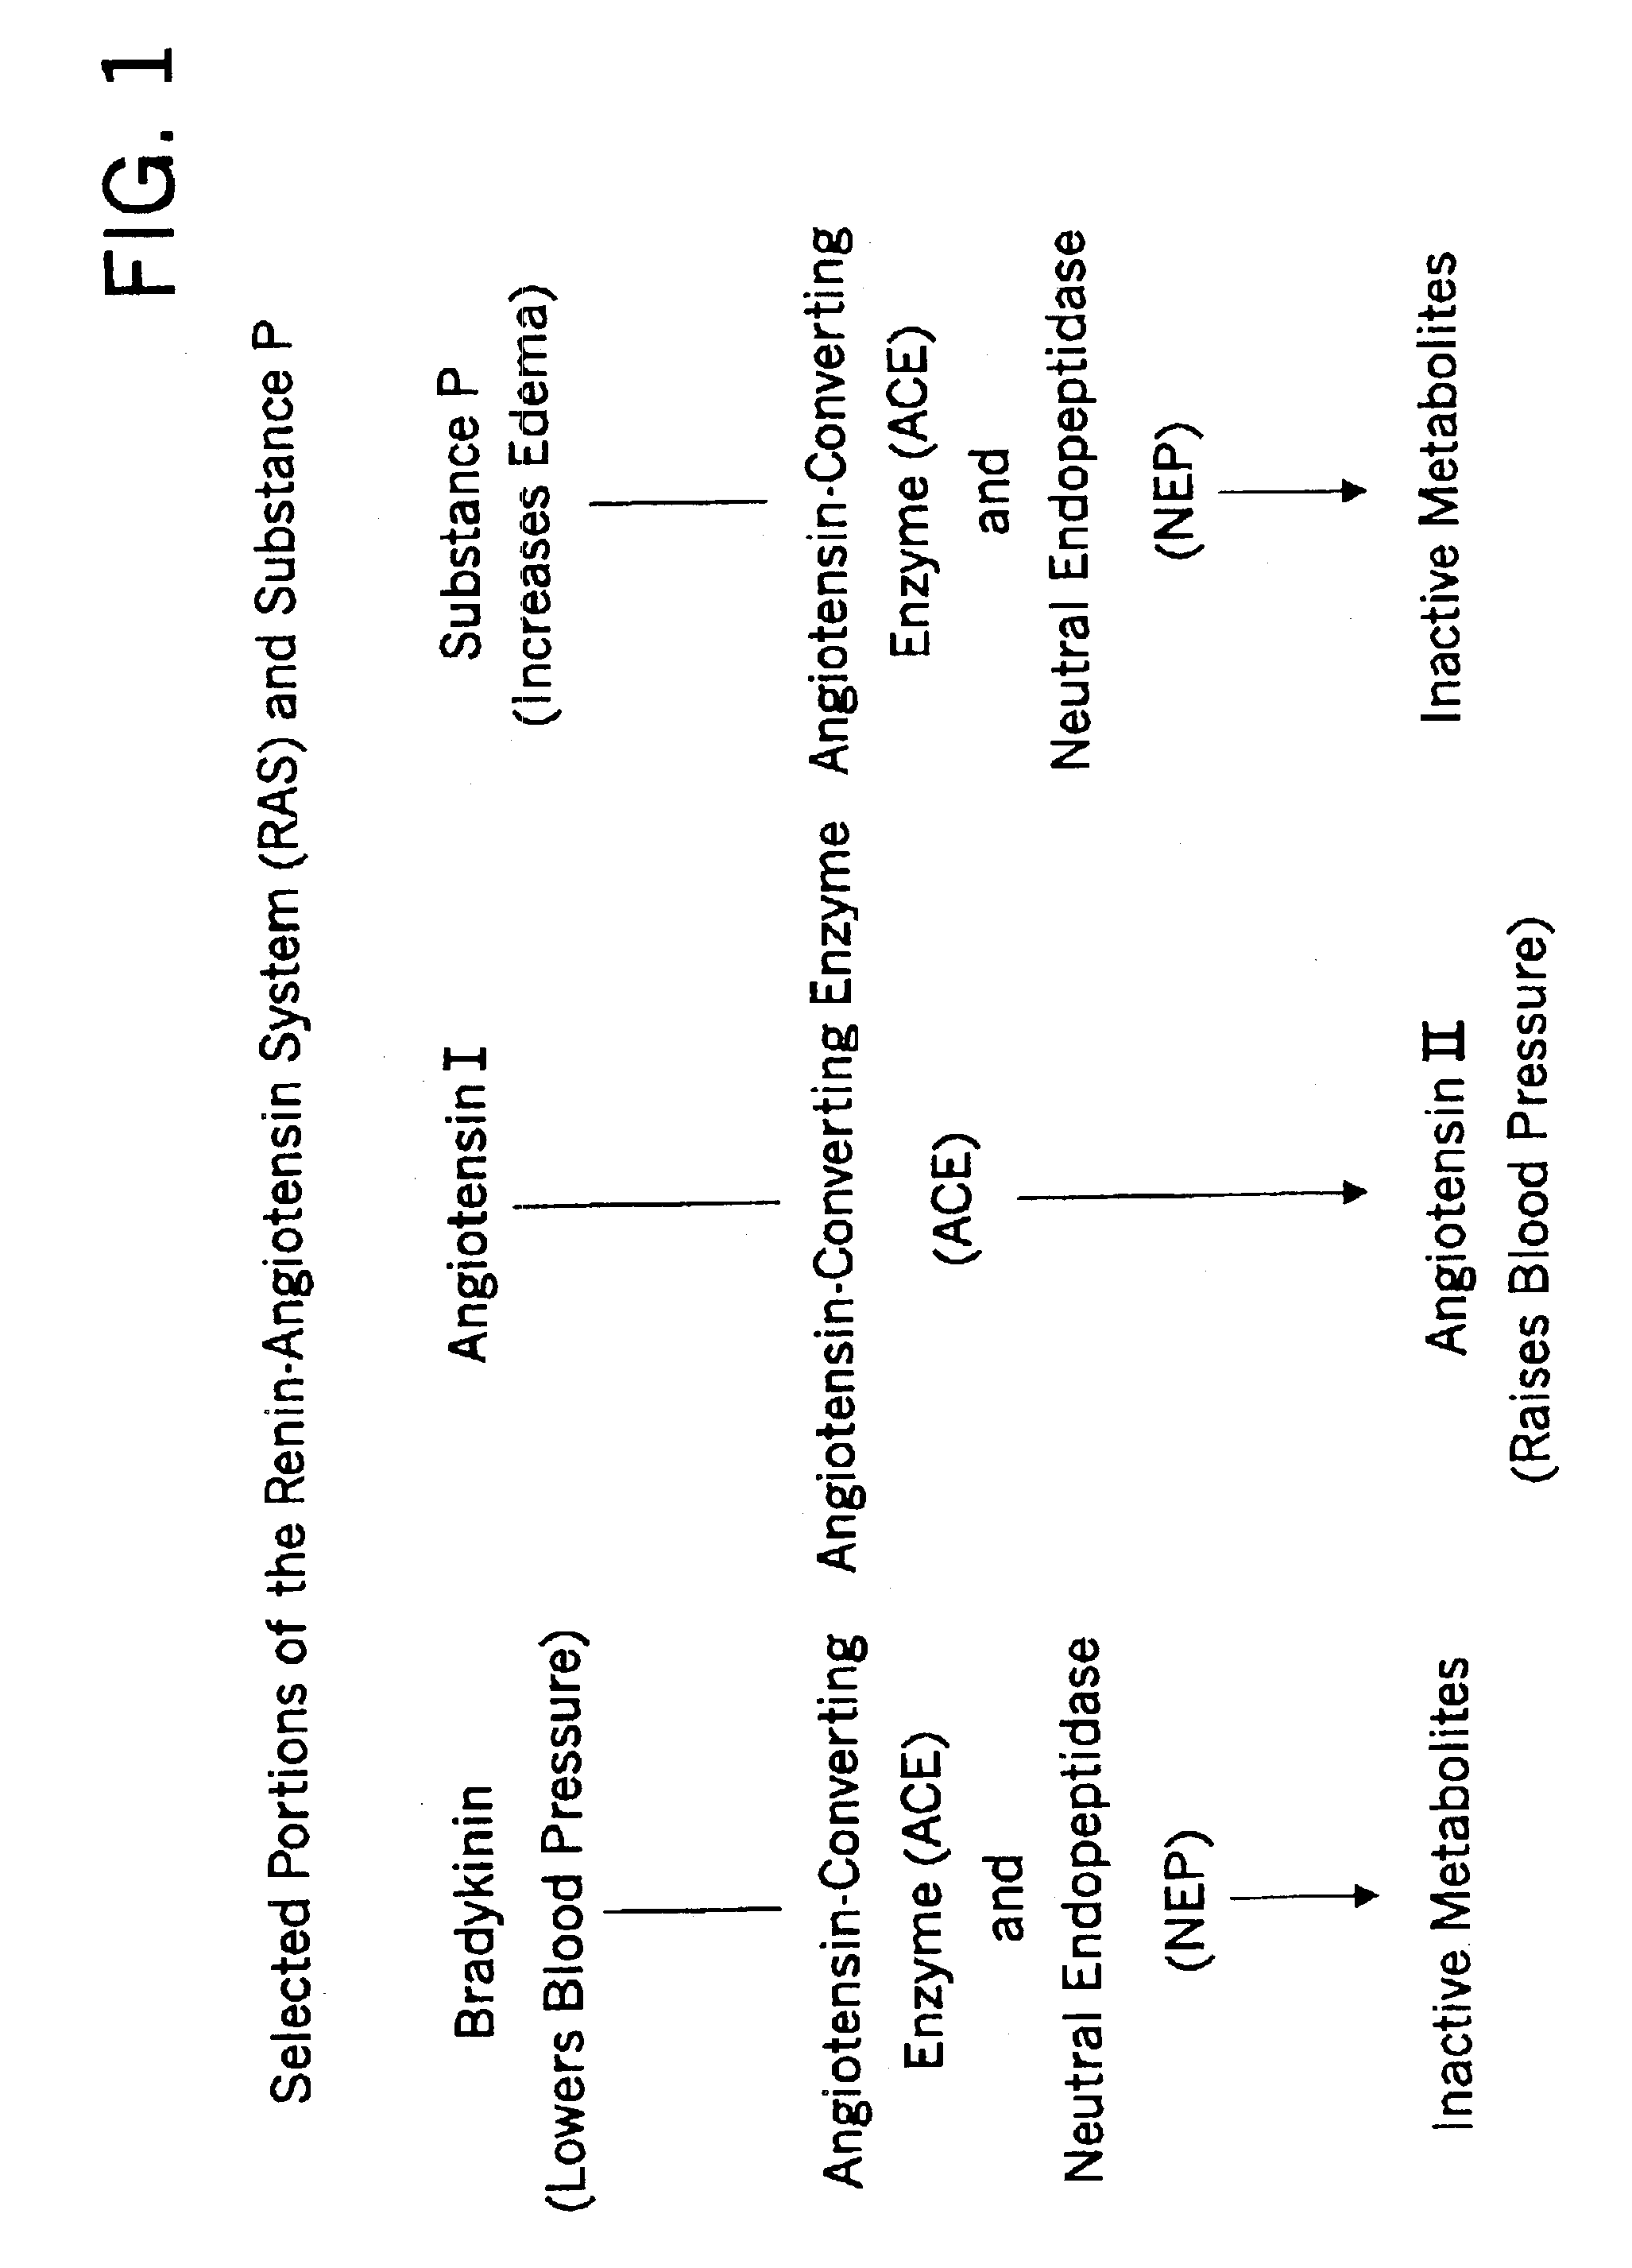 Methods for identifying contraindications to angiotensin converting enzyme inhibitor and/or vasopeptidase inhibitor treatment